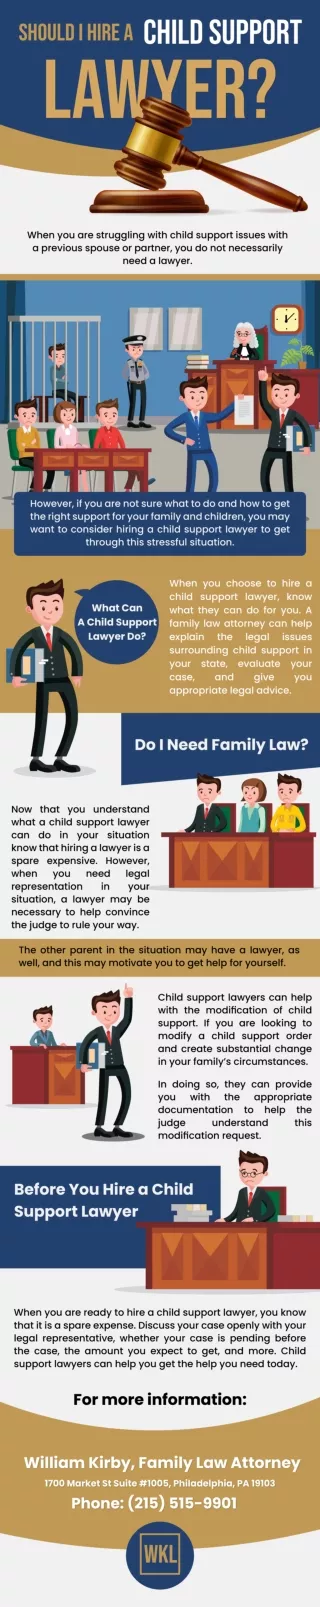 Should I Hire a Child Support Lawyer?